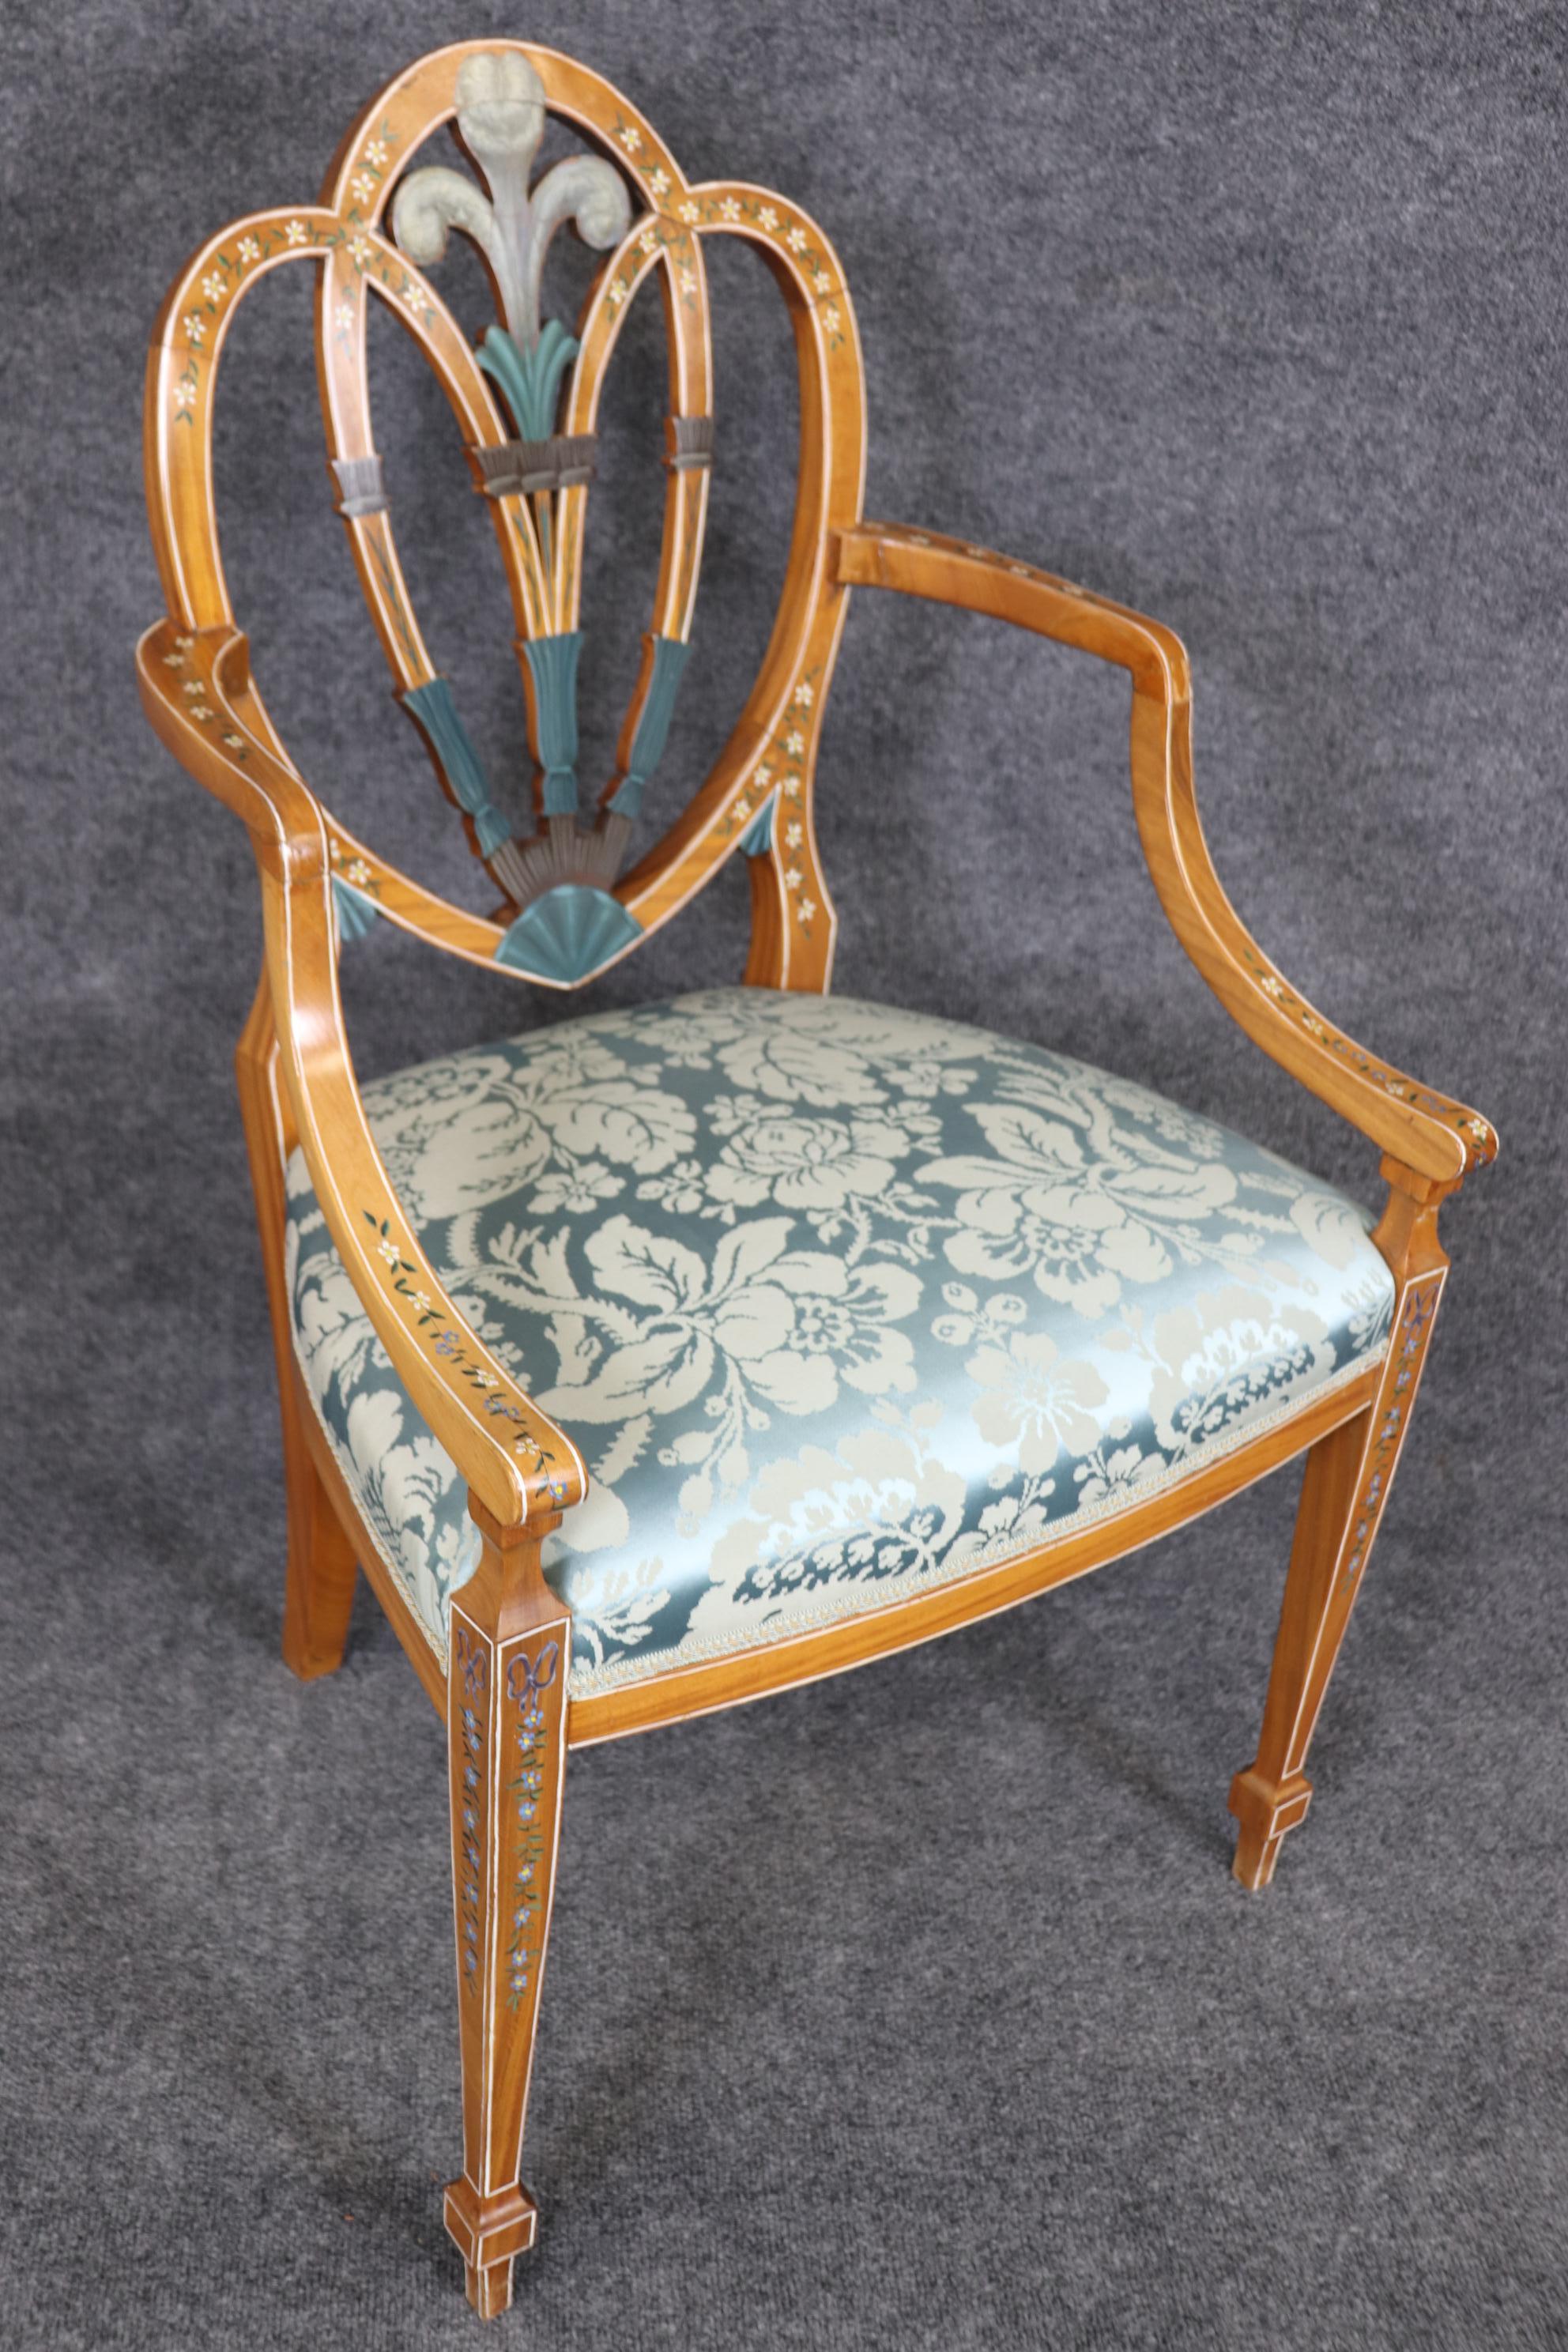 This is a fantastic set of English-made paint decorated solid satinwood shiled back dining chairs with what appears to be a soft blue silk damask on the seats. They are in very good condition for their age and they have absolutely gorgeous